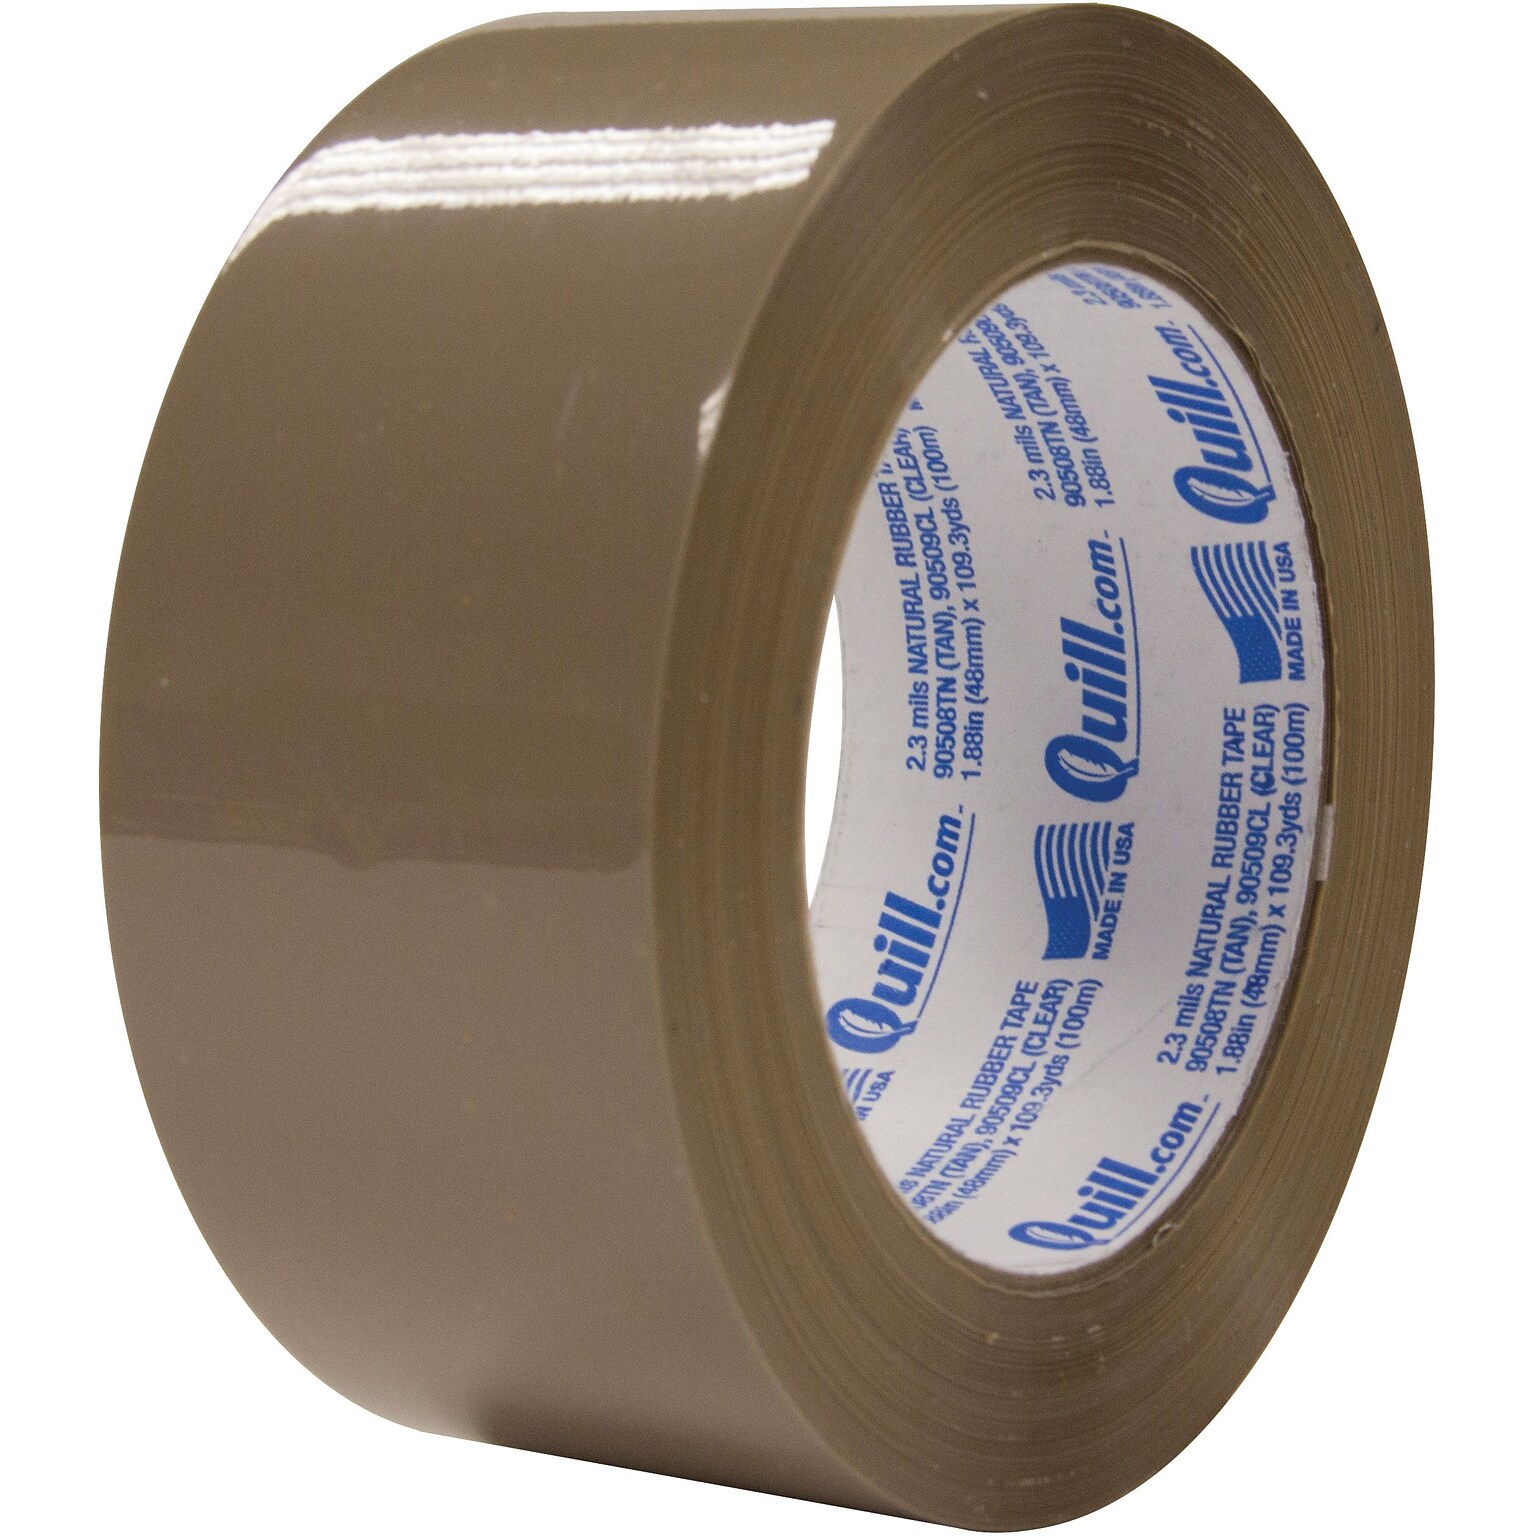 Quill Brand® Medium-Duty Natural Rubber Packing Tape, 2.3 Mil, 2 x 110 yds., Tan, 6/Pack, (C601/90508TN)